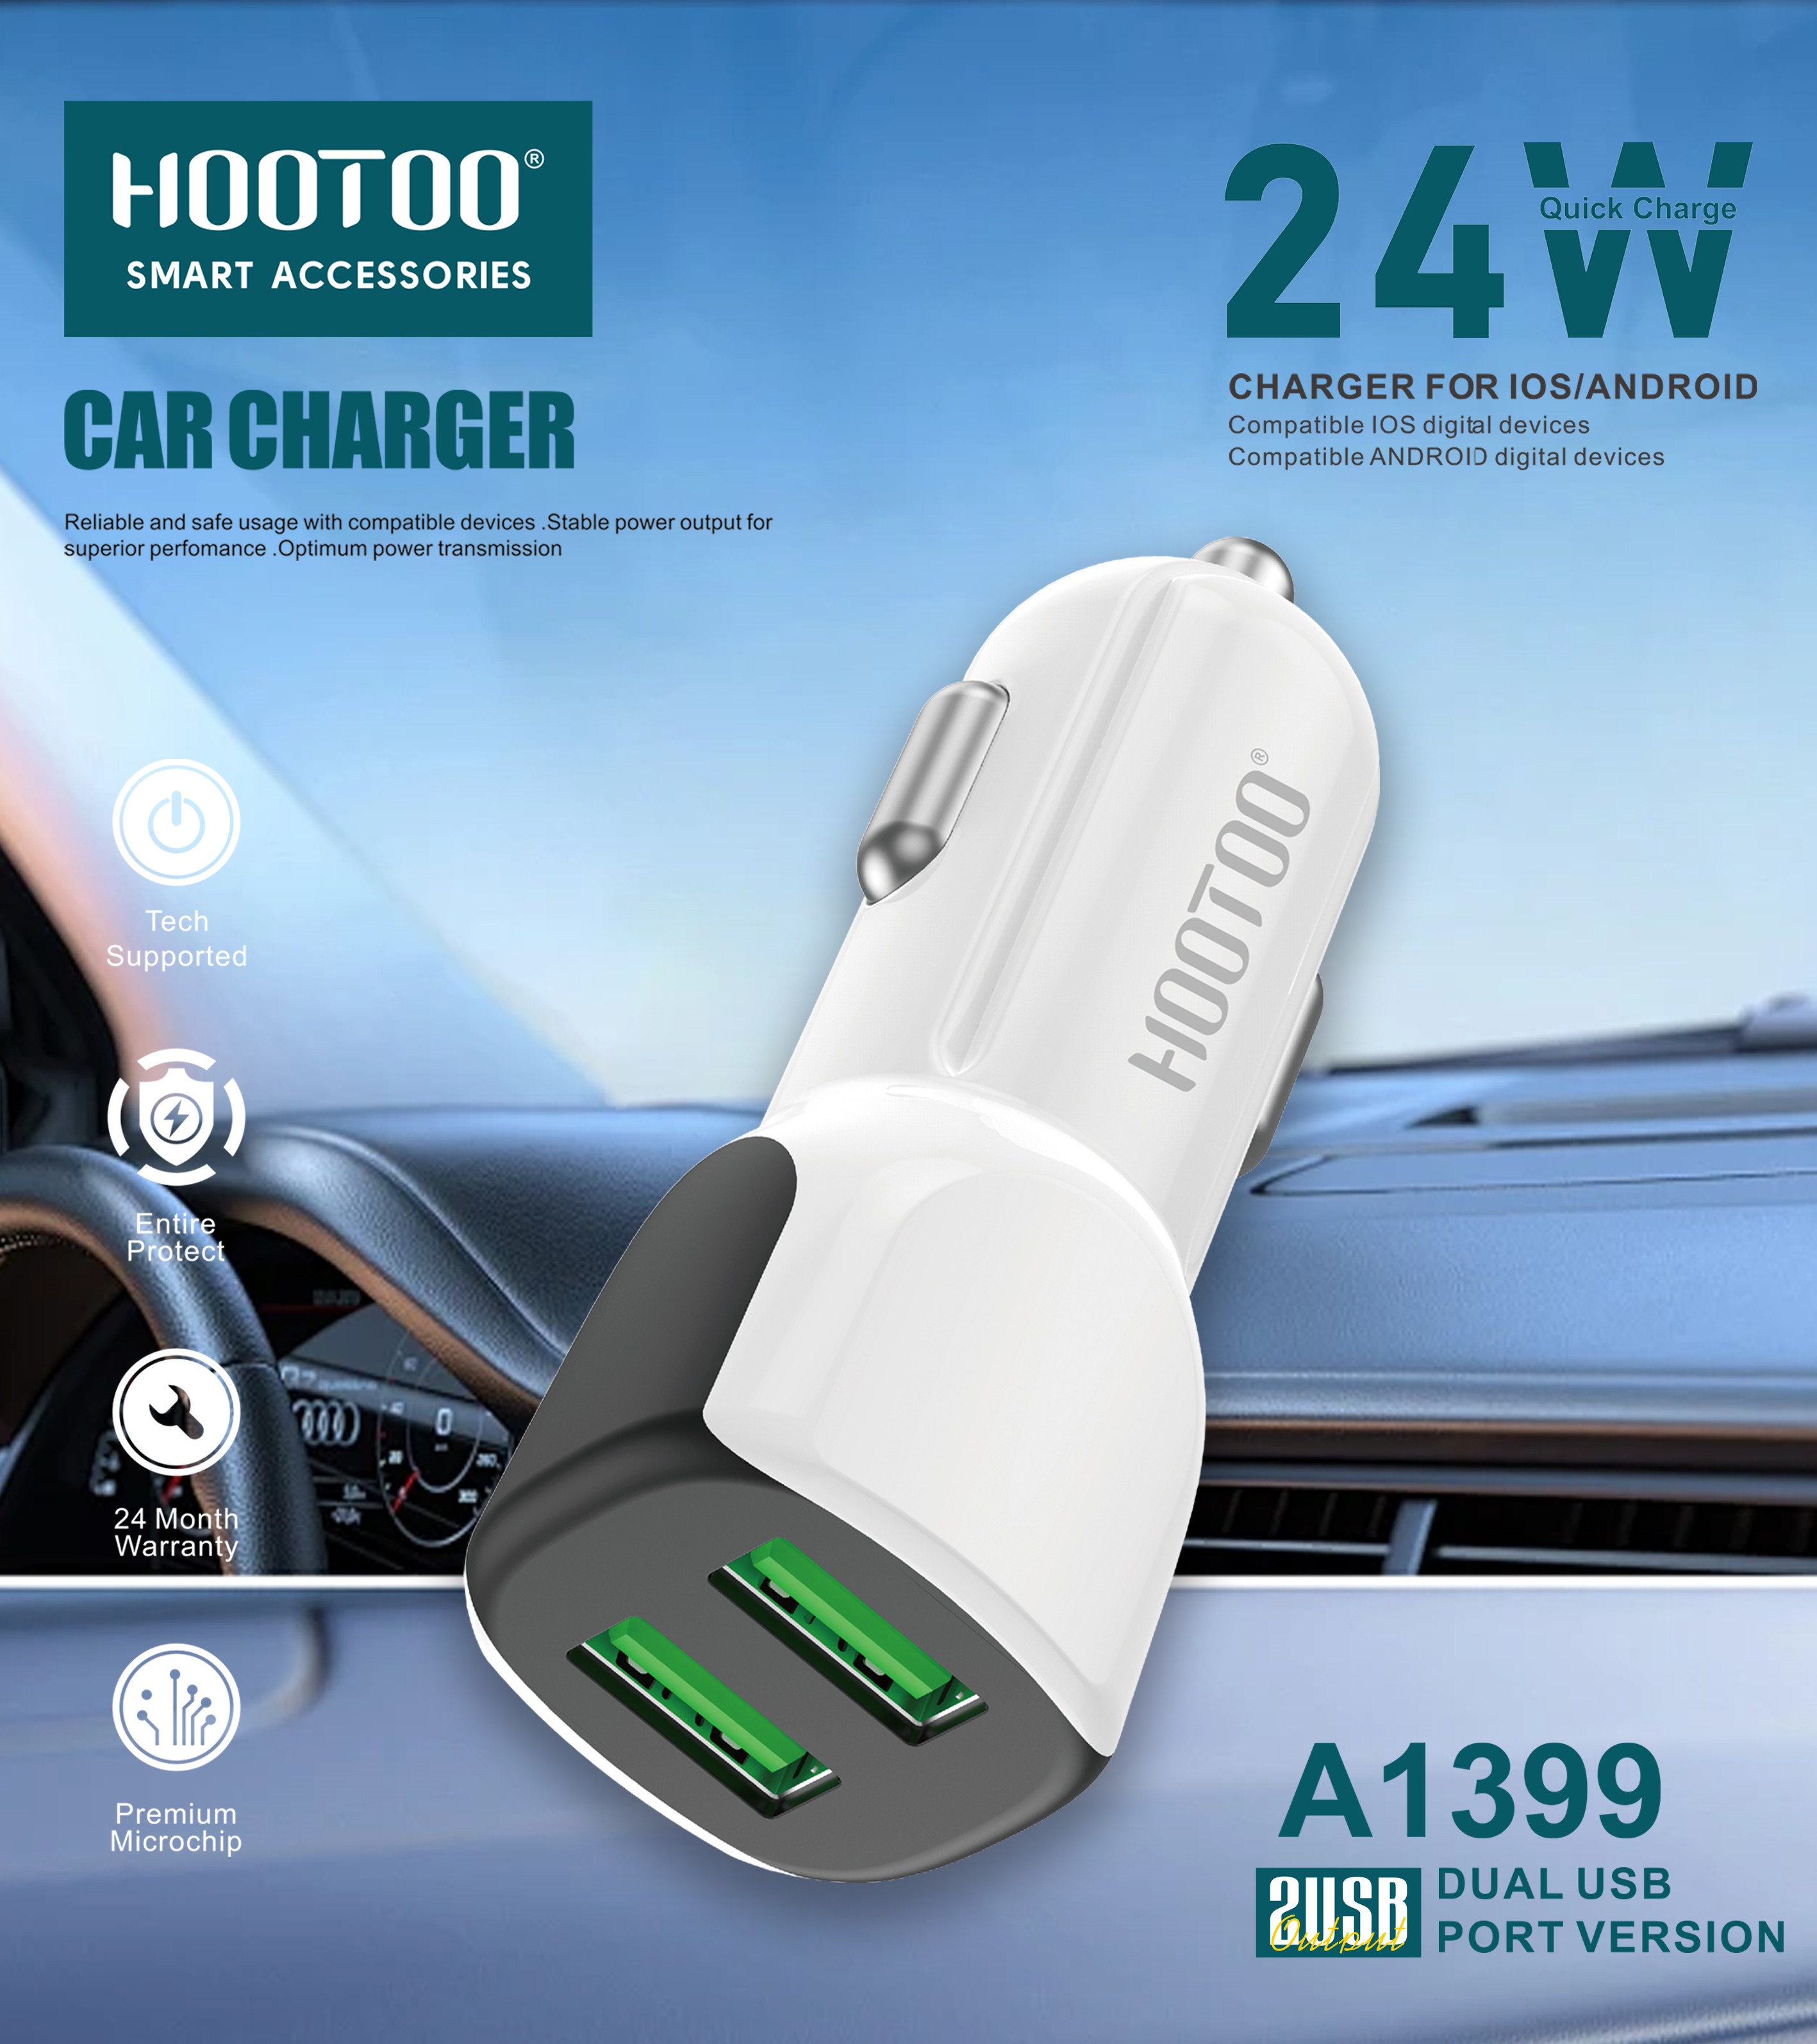 CHARGER A1399